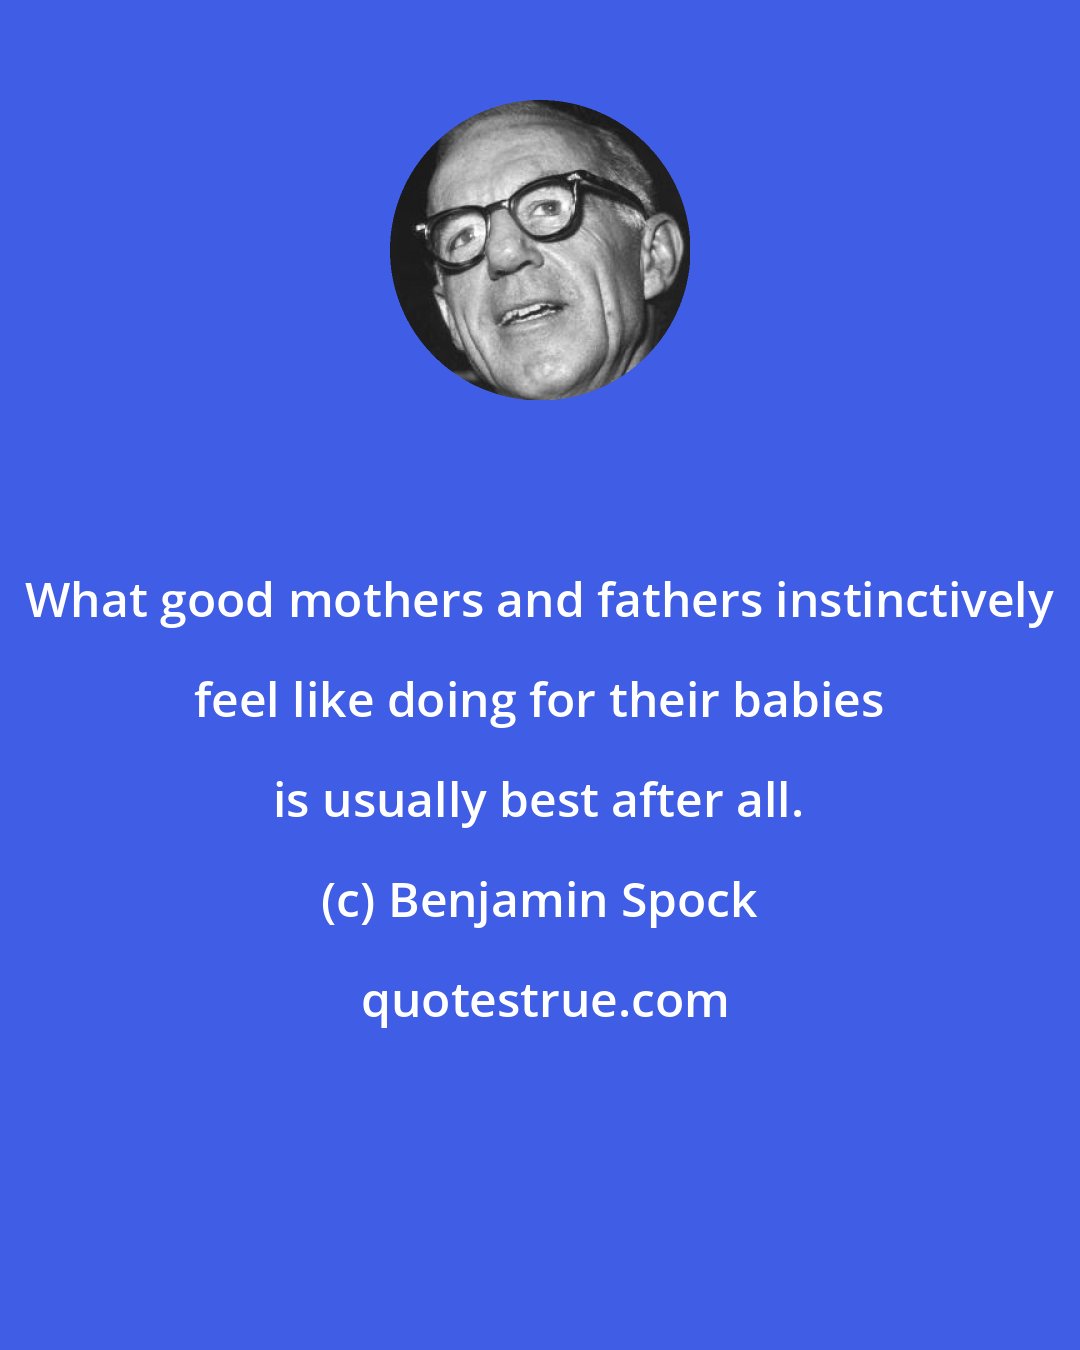 Benjamin Spock: What good mothers and fathers instinctively feel like doing for their babies is usually best after all.